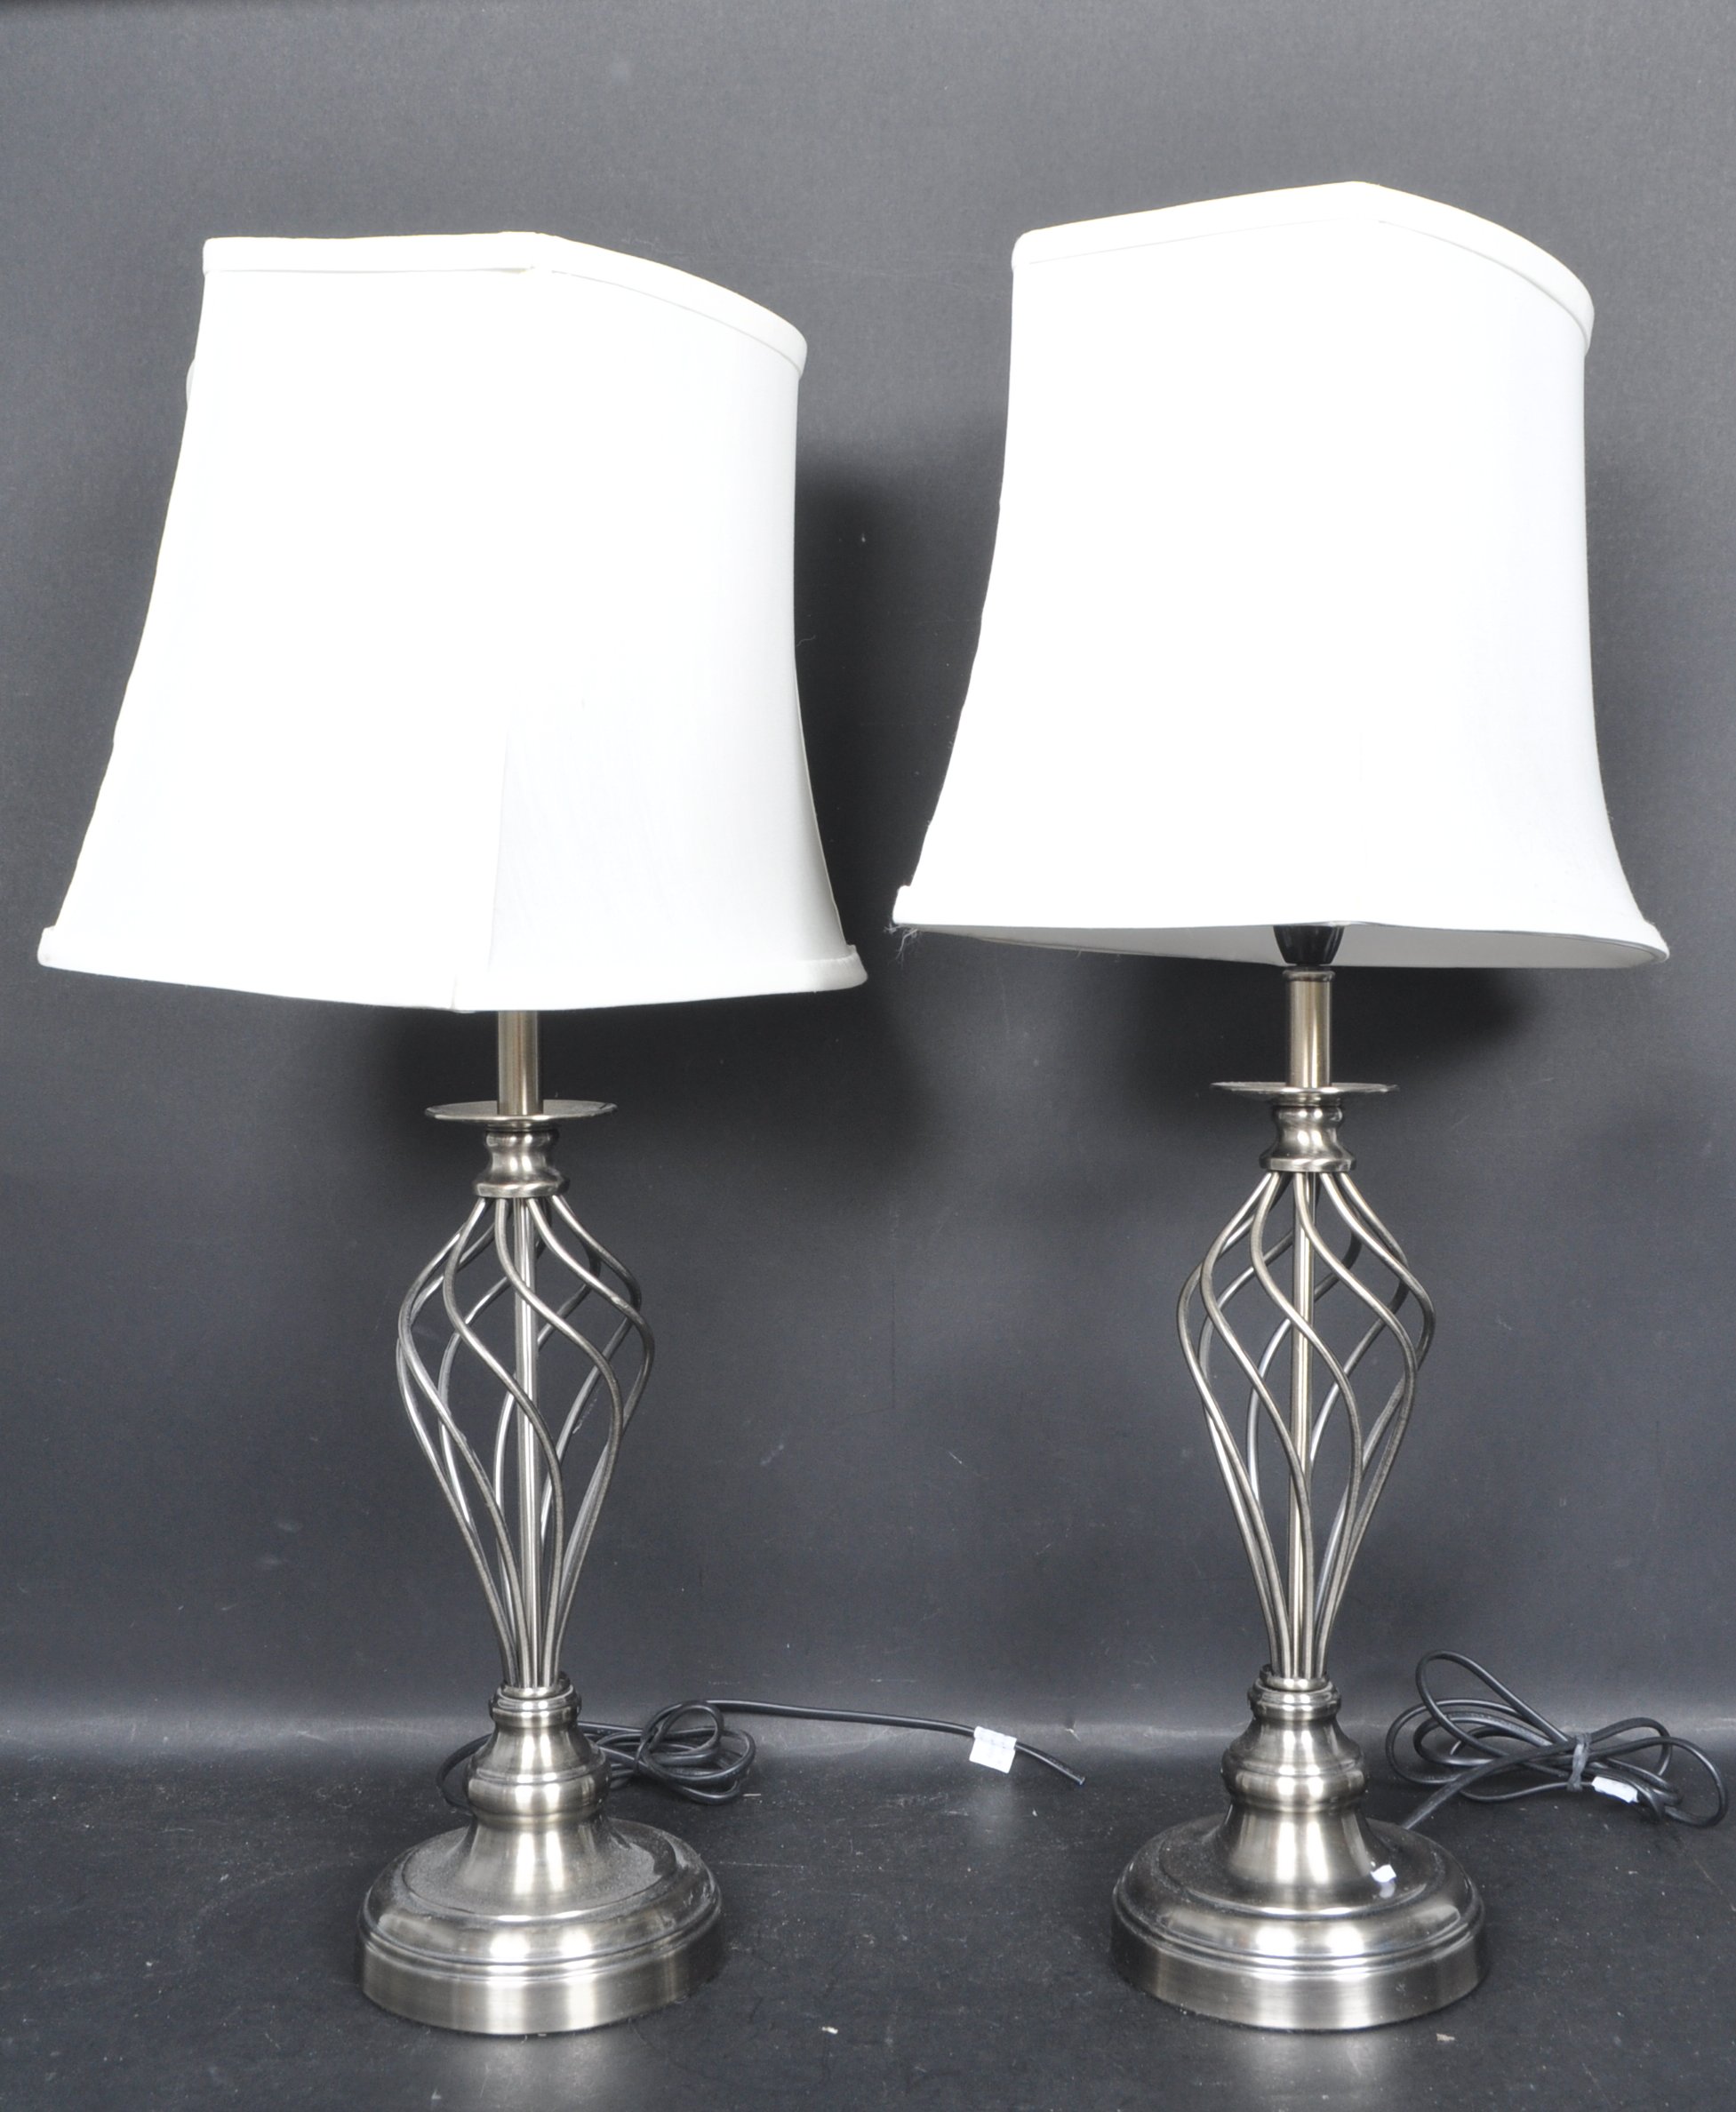 TWO CONTEMPORARY TABLE LAMPS / DESK LAMPS - Image 3 of 5